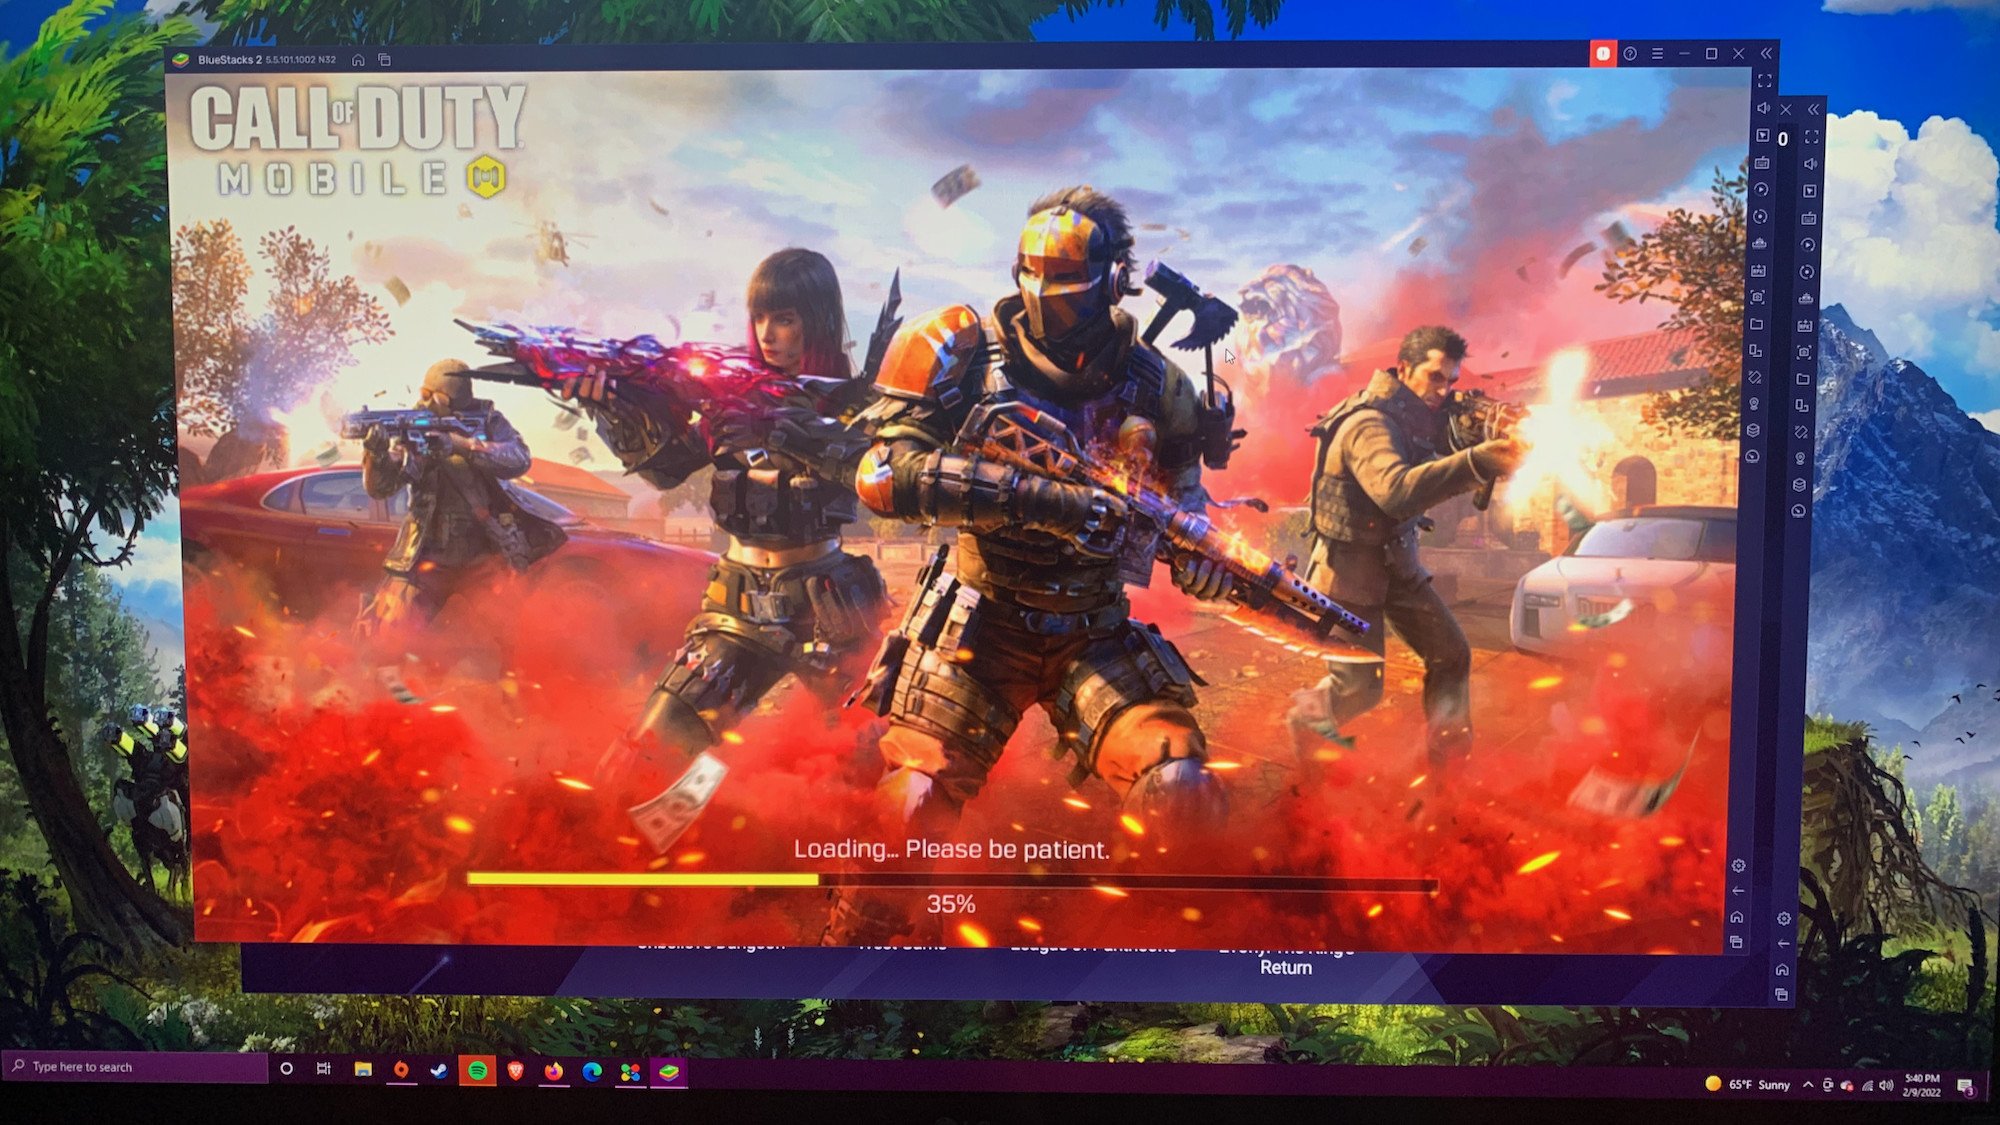 Bluestacks: Call Of Duty loading screen asking to be patient.